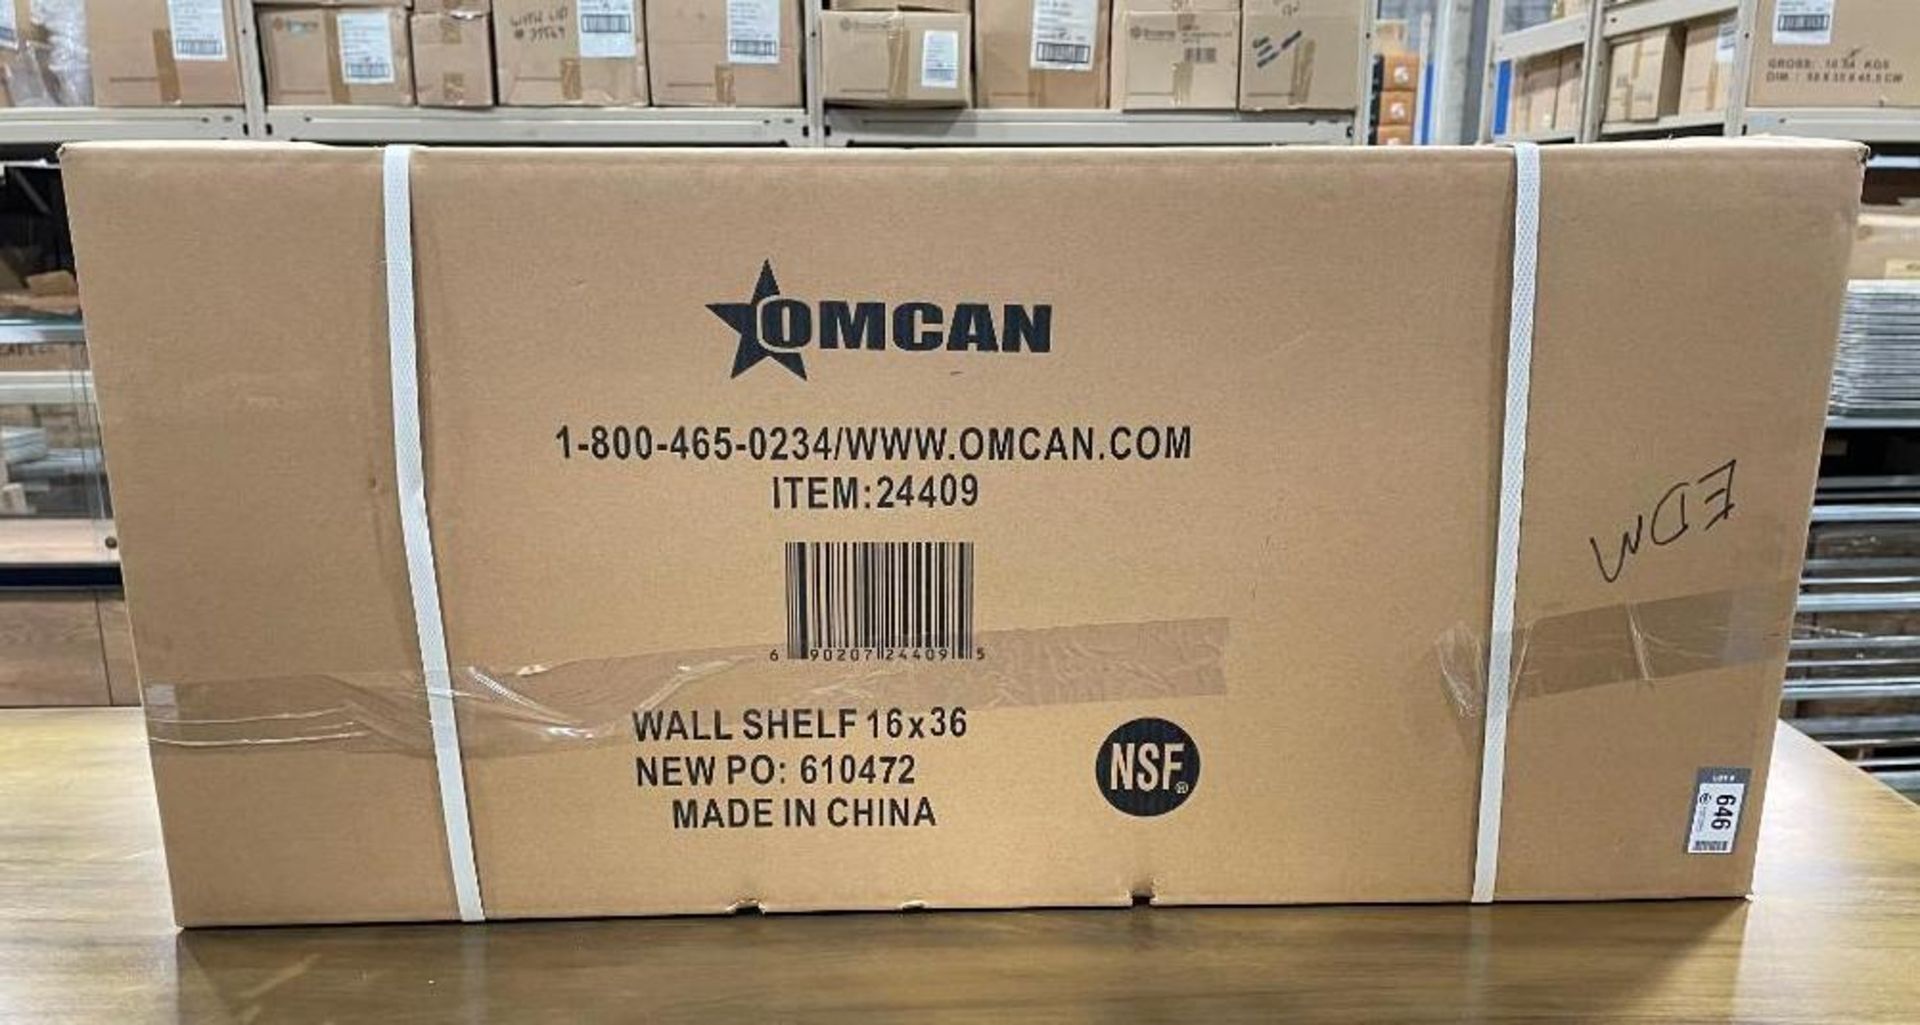 36" X 16" STAINLESS STEEL WALL SHELF - OMCAN 24409 - NEW - Image 3 of 13